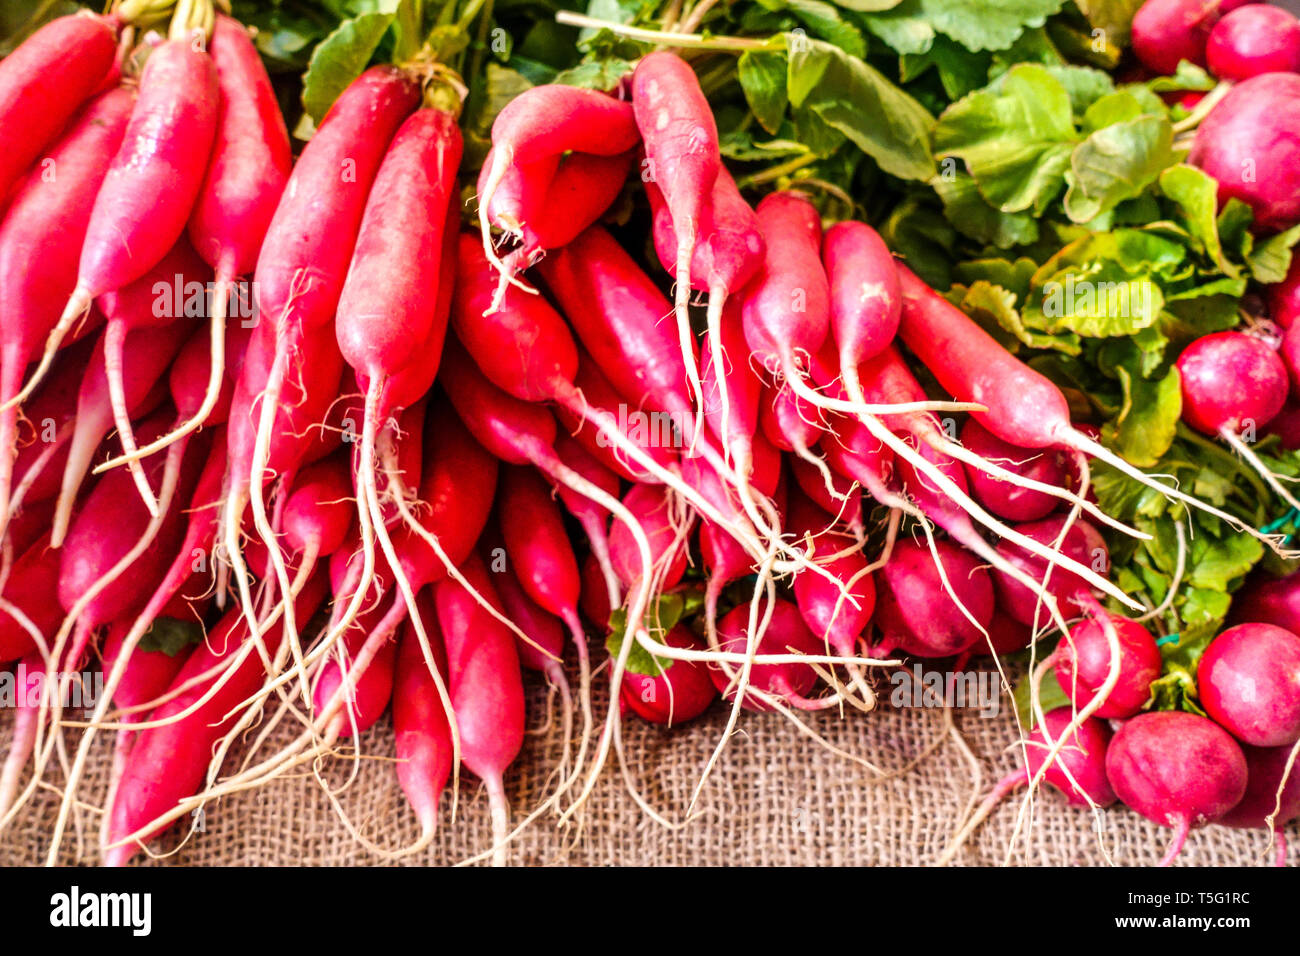 Bunch of red radishes roots on the market, Spain radish roots Stock Photo